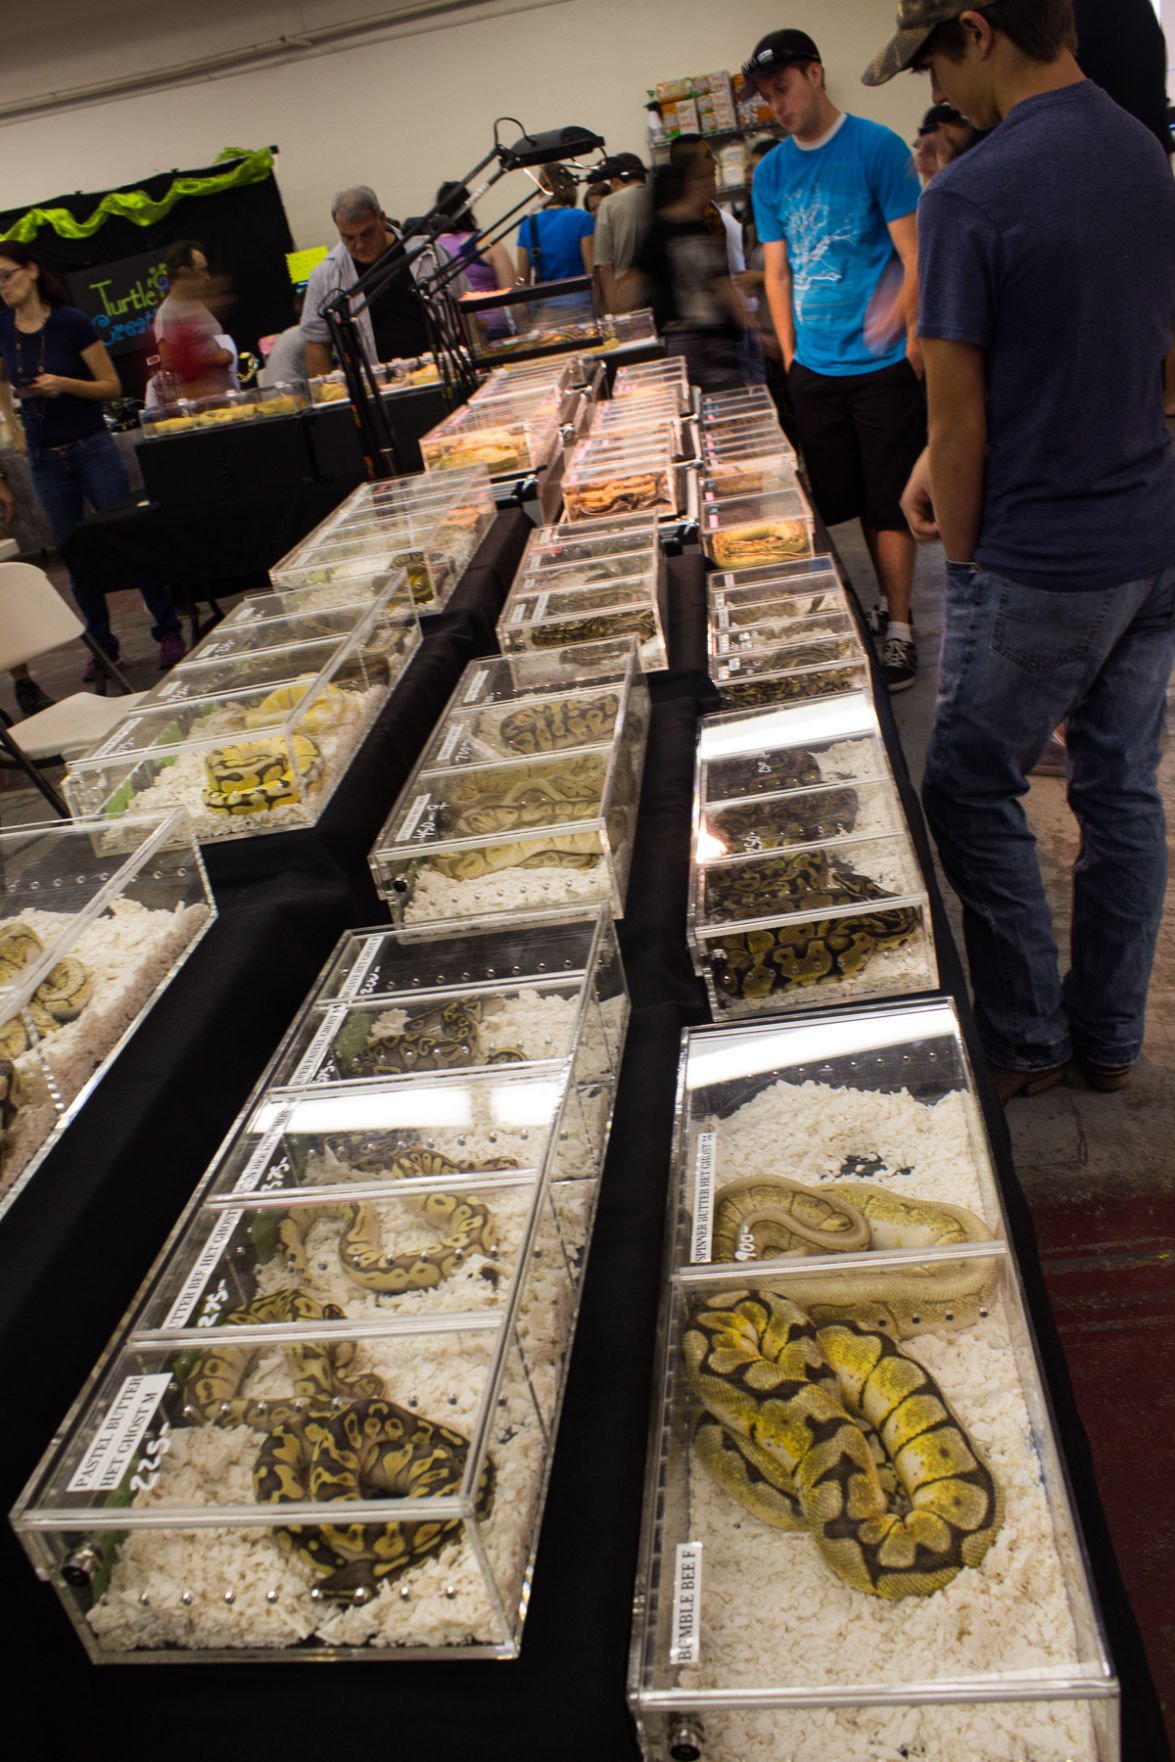 Exotic and rare share space at one of nation's largest reptile shows